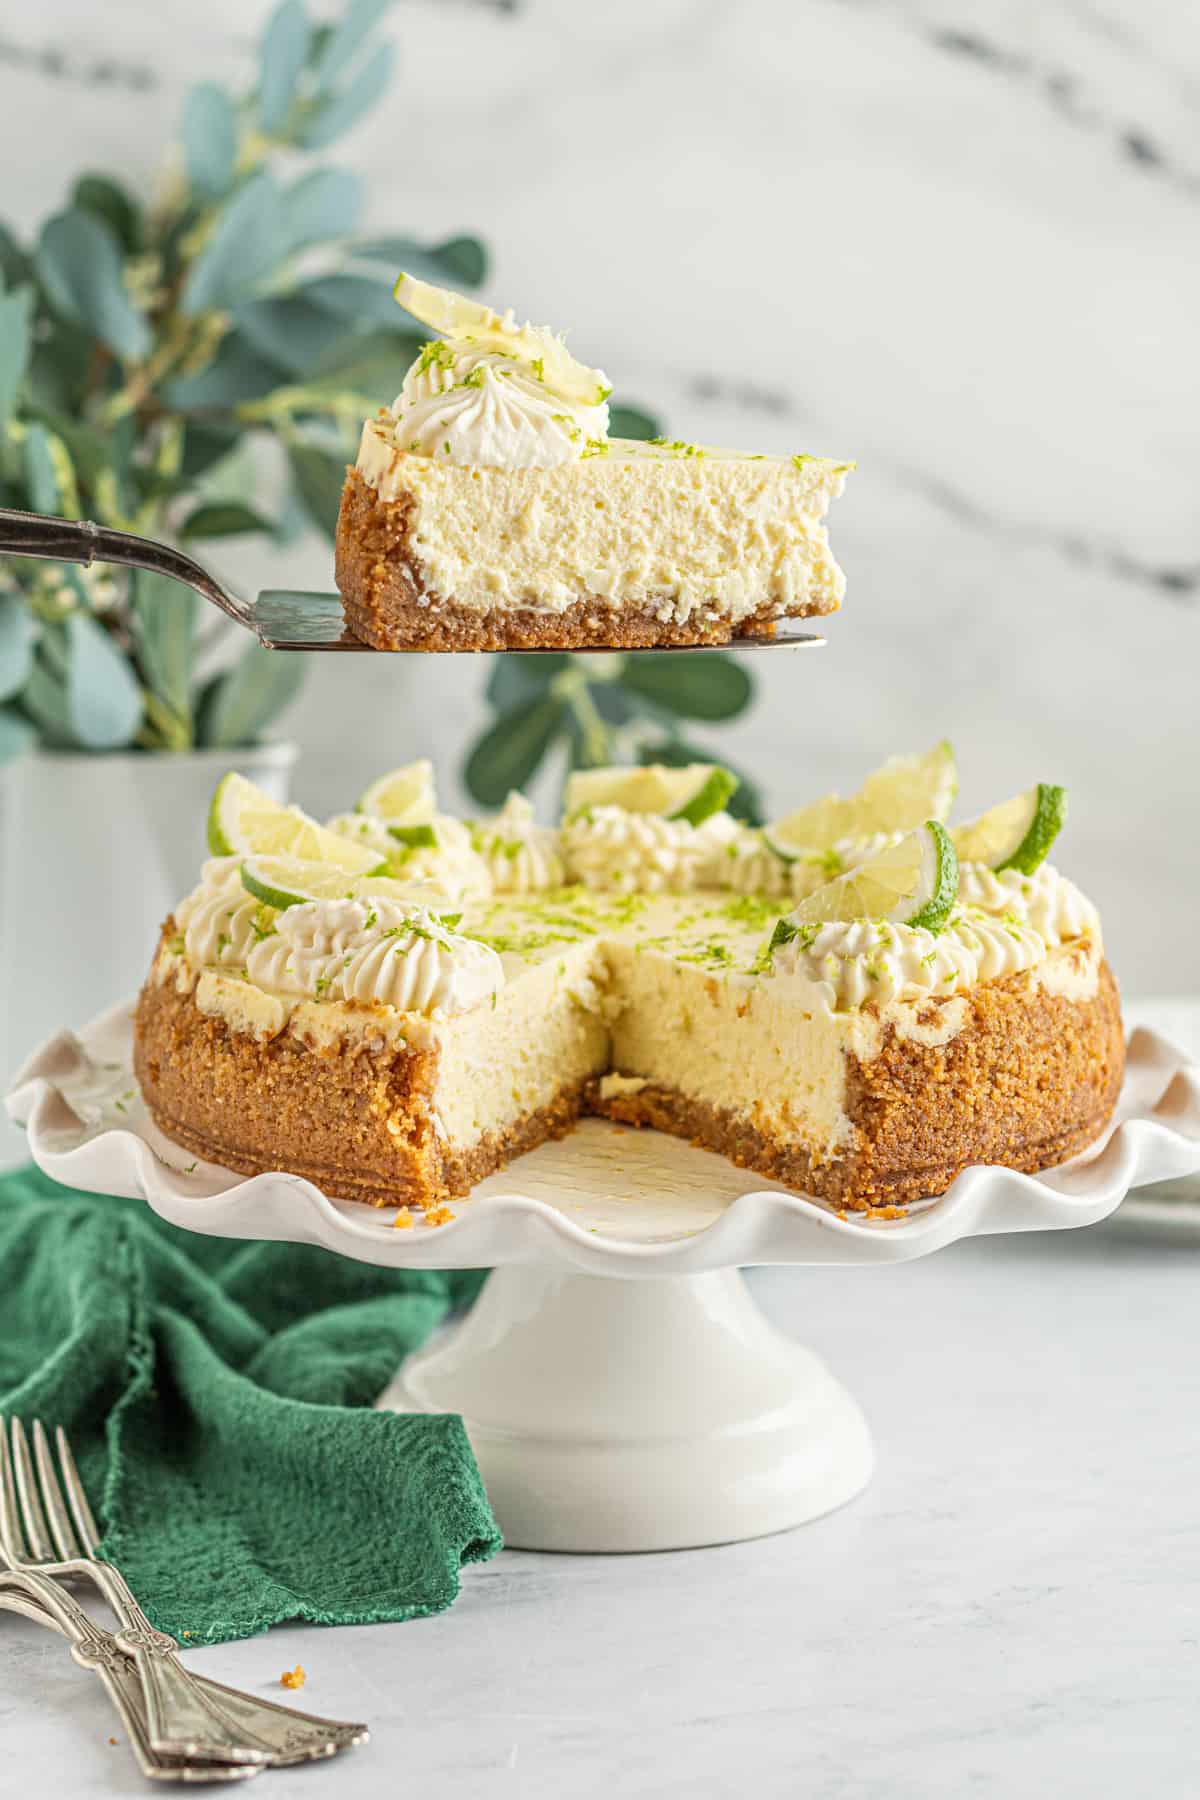 key lime cheesecake on a cake stand, one slice being removed